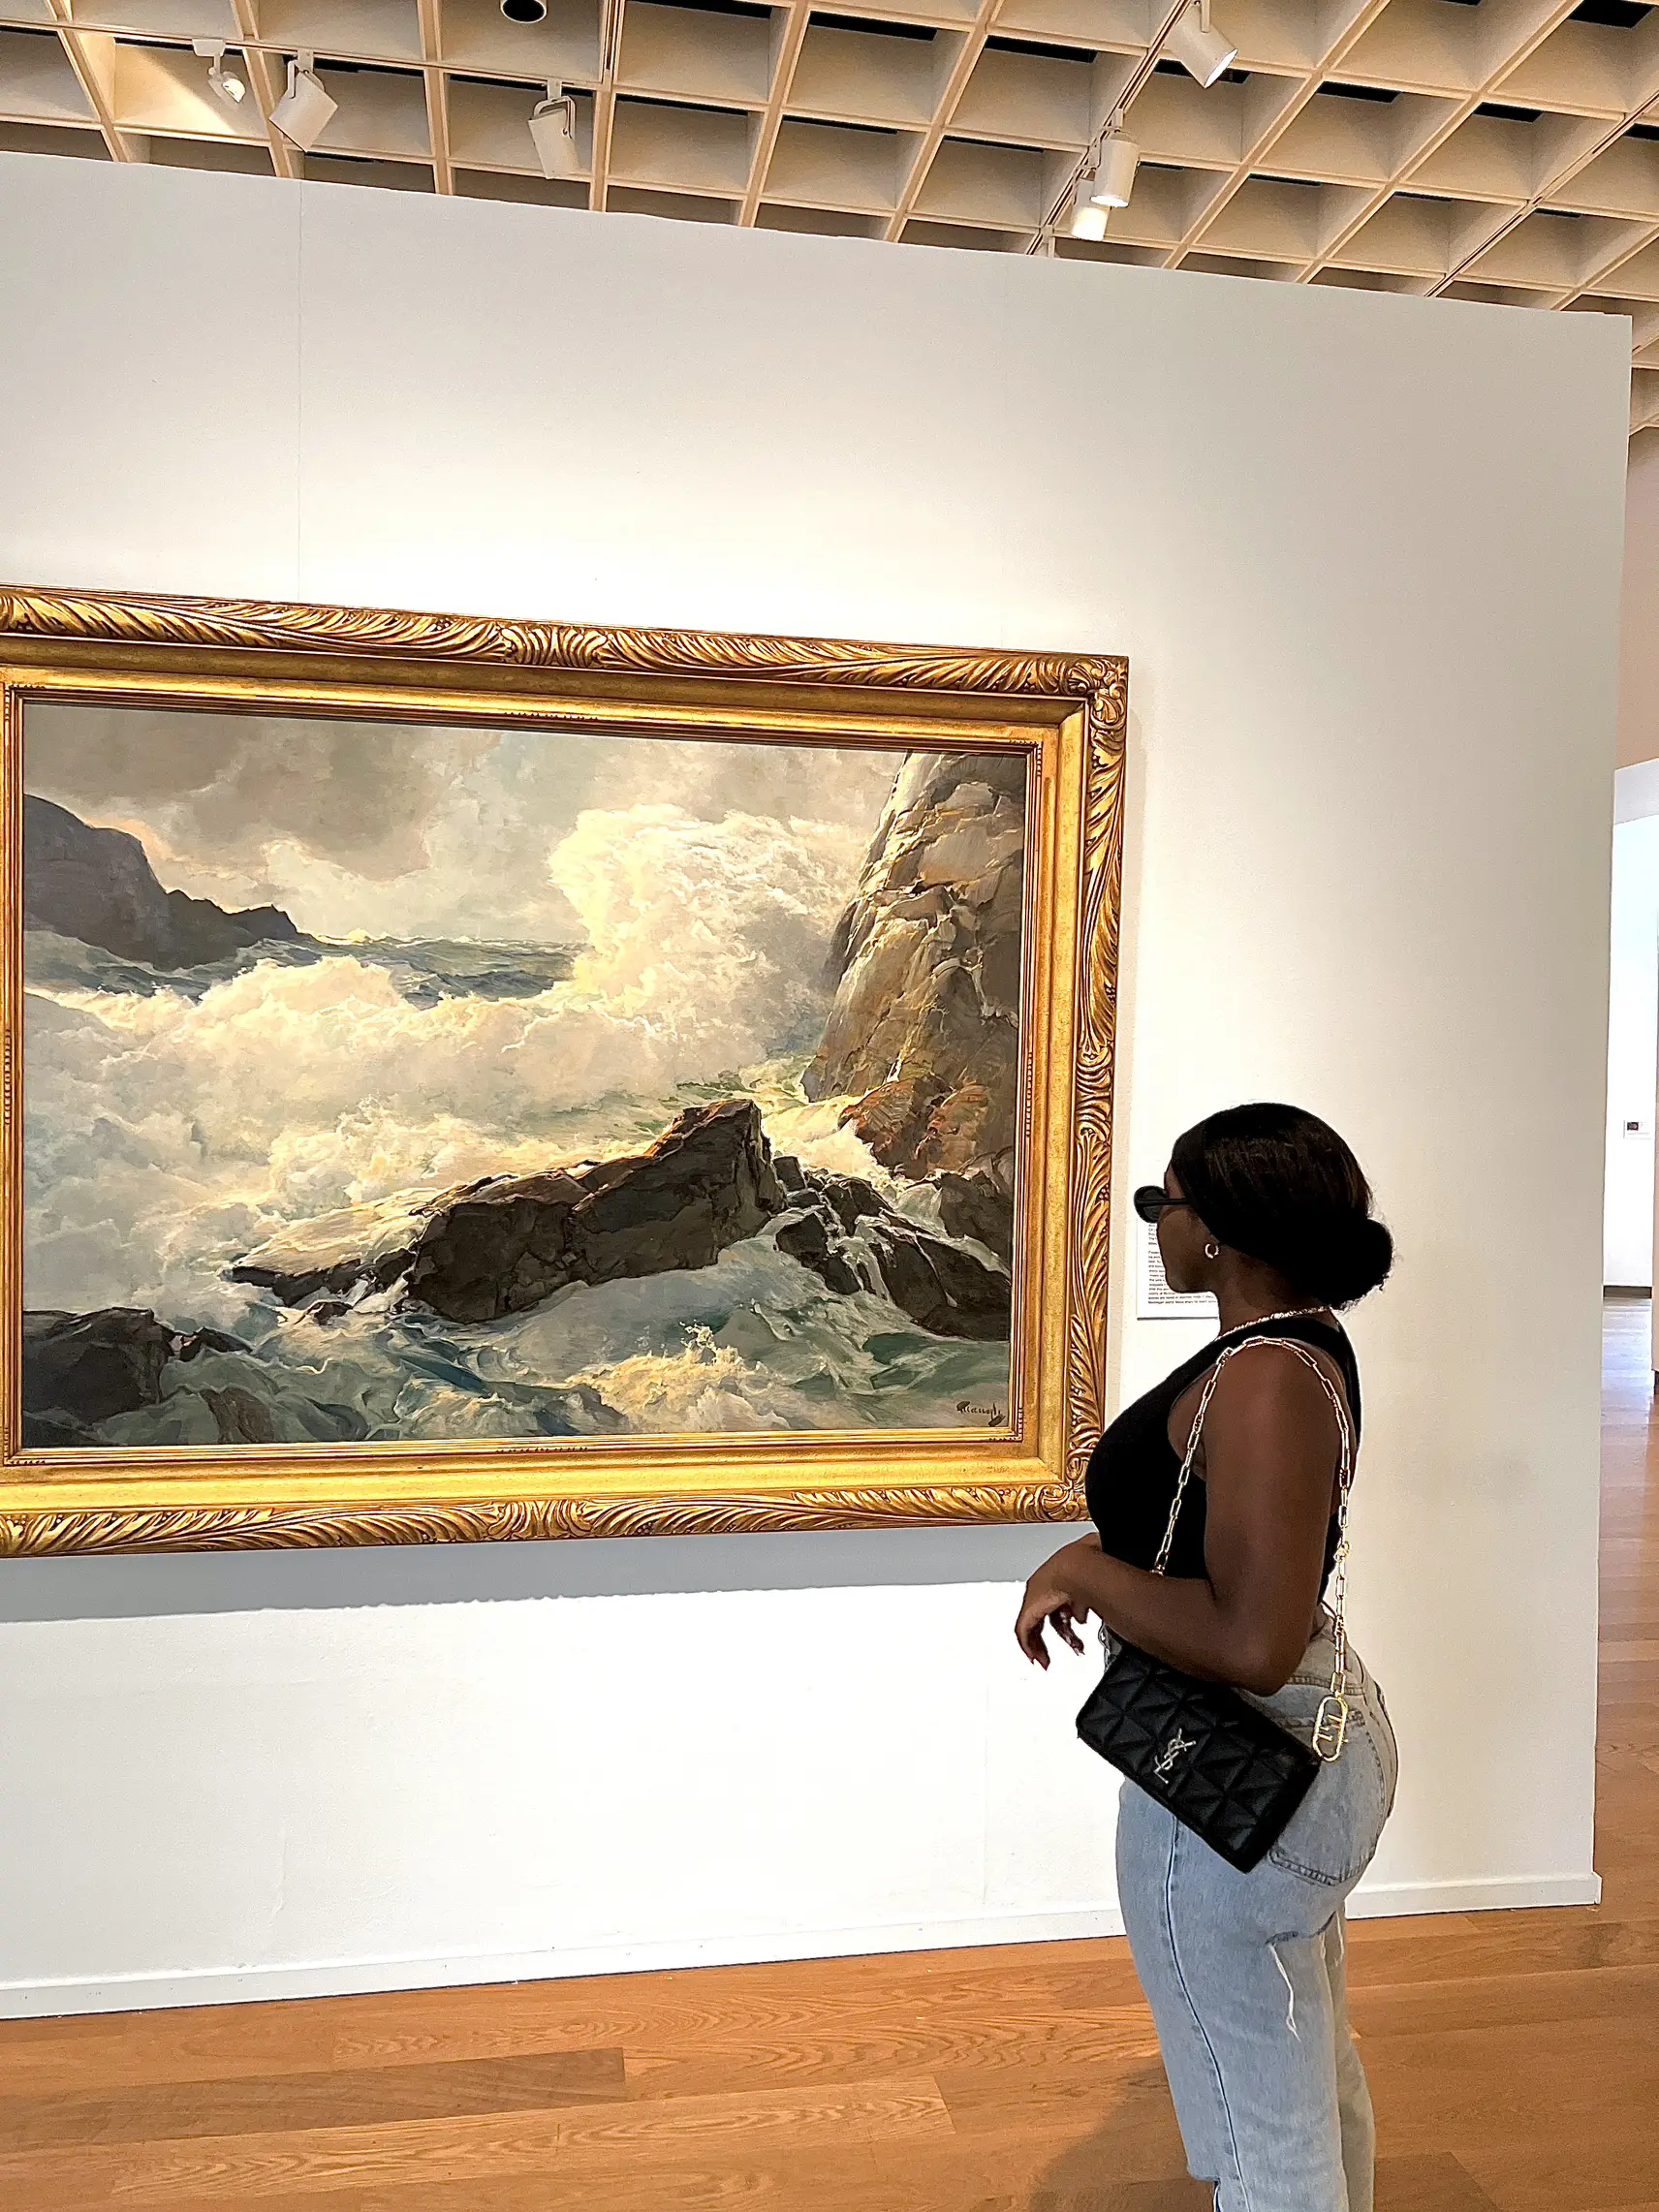  A woman in a black shirt and jeans is standing in front of a large painting. She is holding a purse and wearing a hat. The painting depicts a beach scene with a mountain in the background.